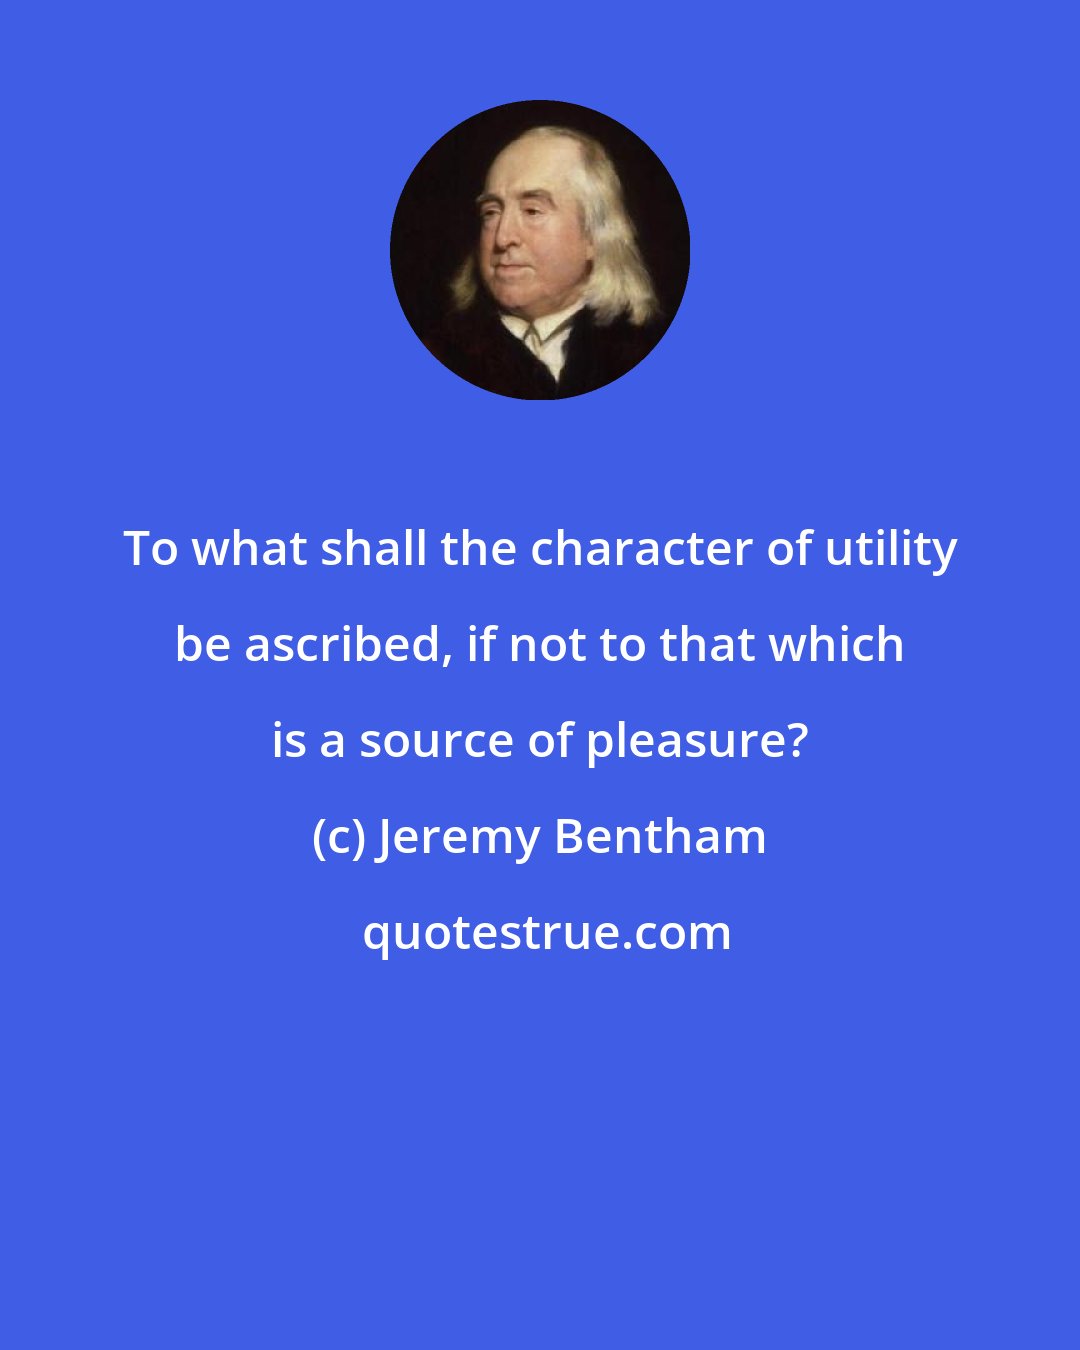 Jeremy Bentham: To what shall the character of utility be ascribed, if not to that which is a source of pleasure?